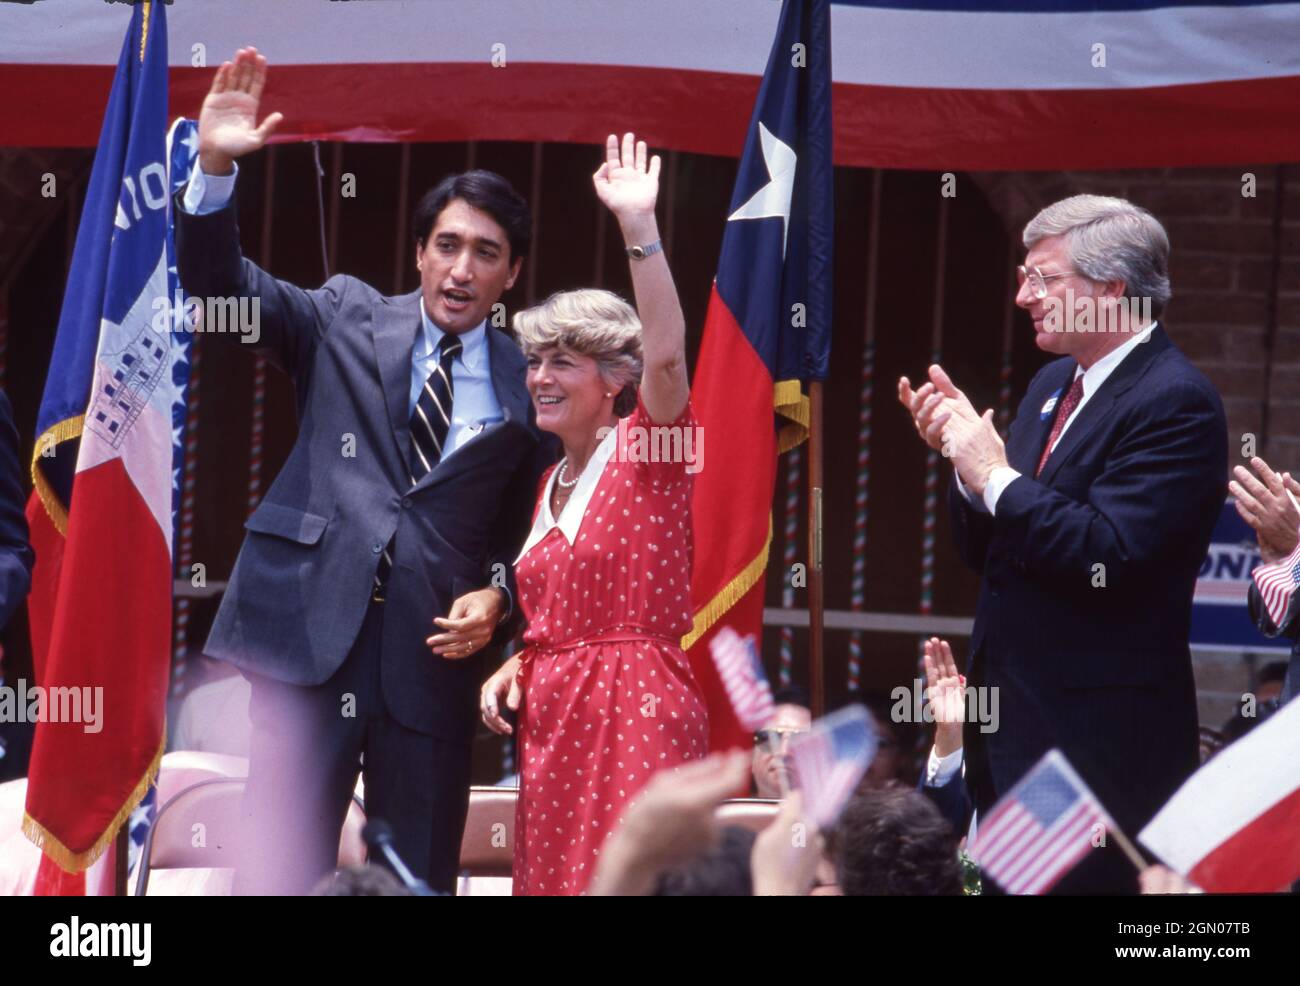 San Antonio Texas USA, 1984: Democratic vice presidential candidate Geraldine Ferraro waves to supporters during a campaign rally at Market Square. Ferraro is the first woman nominated as vice president of a major party in American politics. She is flanked by fellow Democrats Henry Cisneros, mayor of San San Antonio A(left) and Texas Gov. Mark White (right). ©Bob Daemmrich Stock Photo